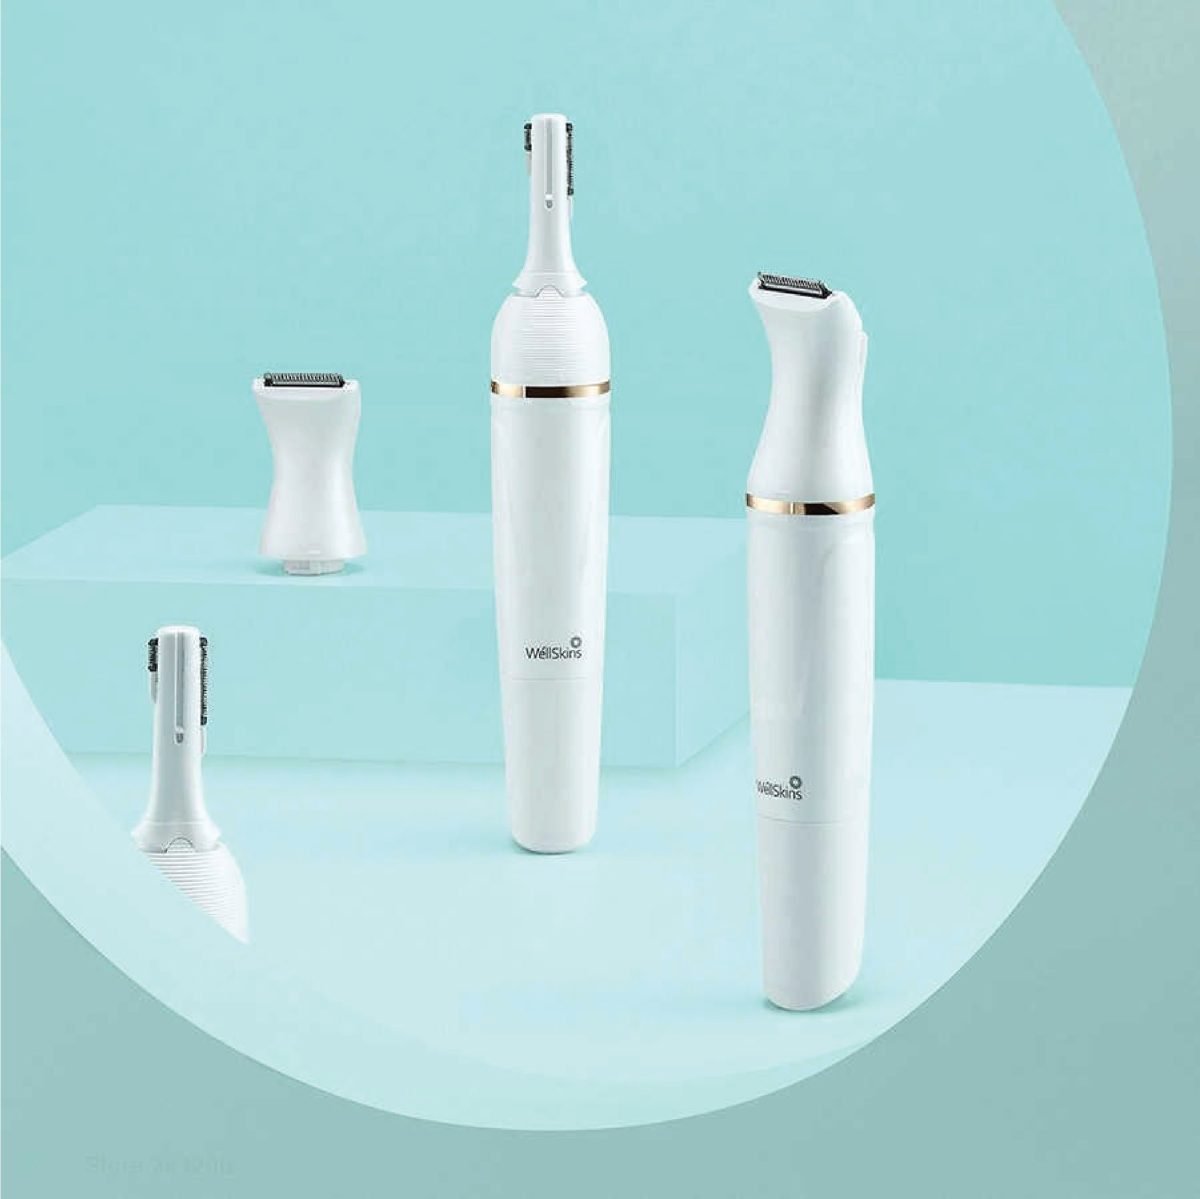 T3 05 Xiaomi Xiao Mi Youpin Wéllskins Electric Trimmer Repairer Shaver Body Hair Removal With Pivoting Head 30° Adjustable Cutter Head Hair Remover For Women Painless Lady Shaver 6-In-1 Https://Www.youtube.com/Watch?V=N-Wn12U3Uj4 Wéllskins Xiaomi Wellskins Wx-Tm01 Personal Beauty Trimmer